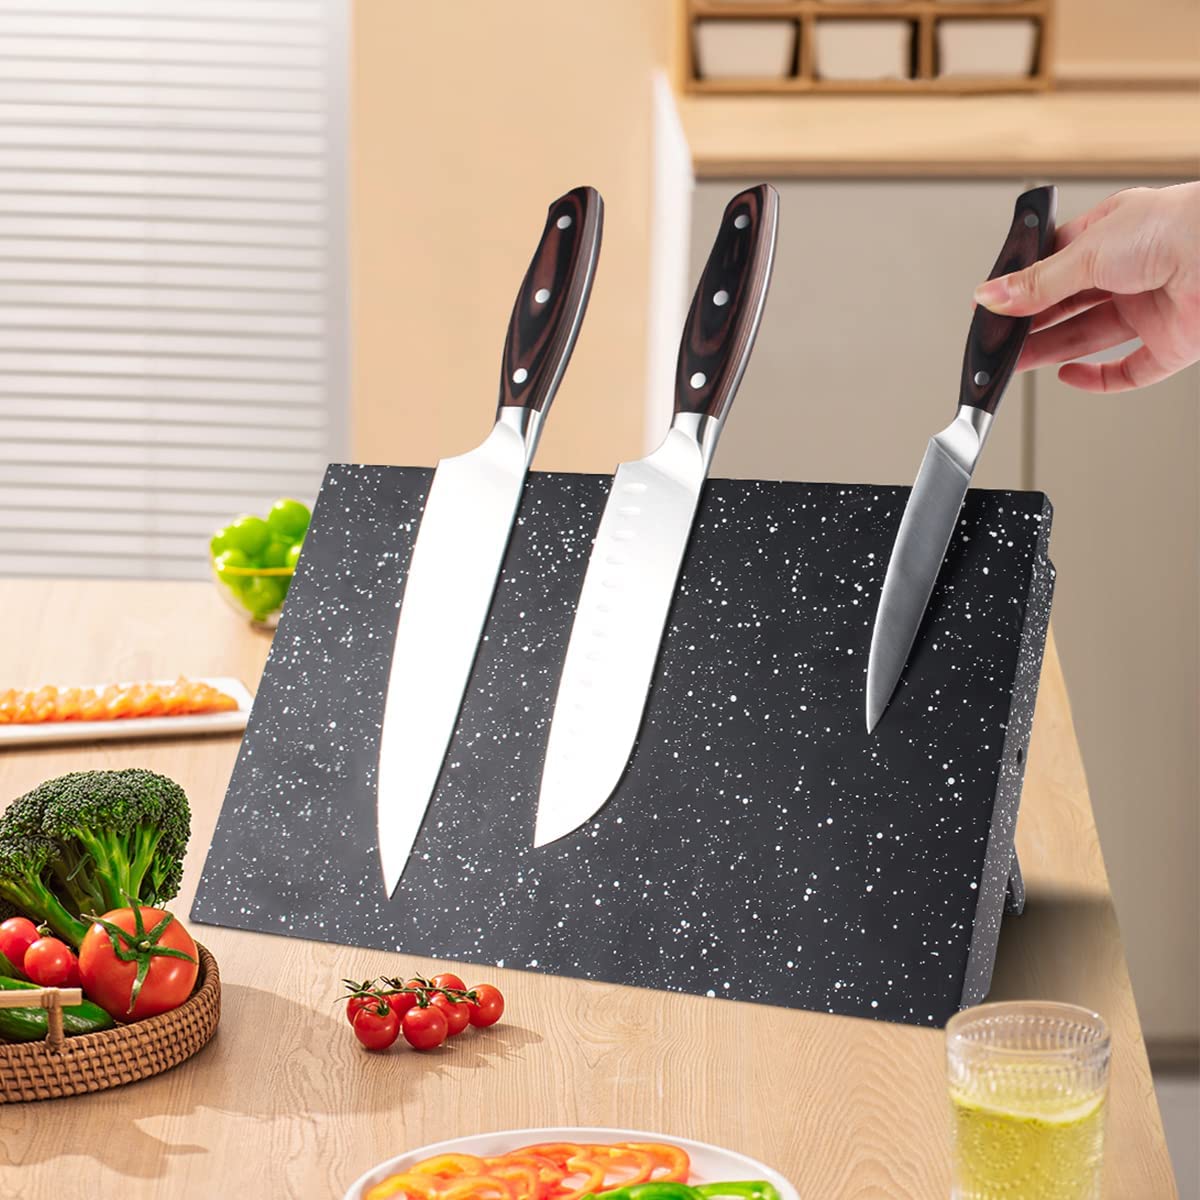 MOSFiATA Magnetic Knife Block - Magnetic Knife Holder - Magnetic Knife Stand- Cutlery Display Stand and Storage Rack